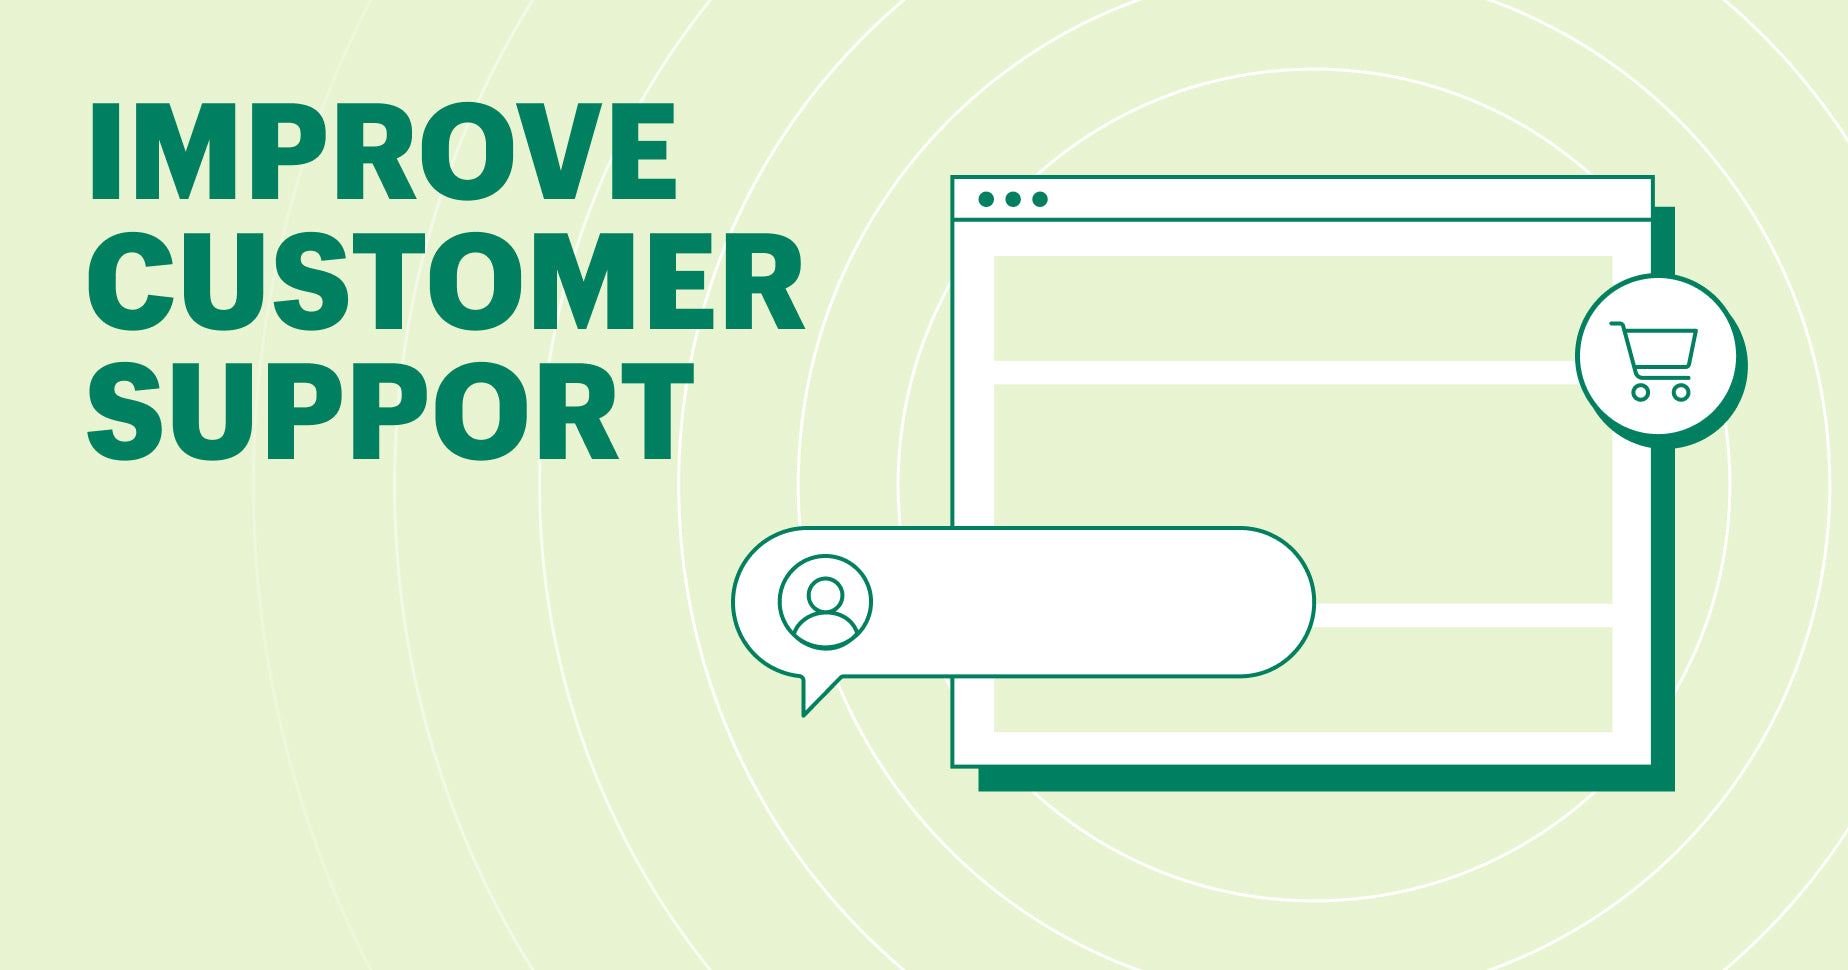 Shopify Customer Accounts: Guide to Creating a Customer Account Page -  Richpanel